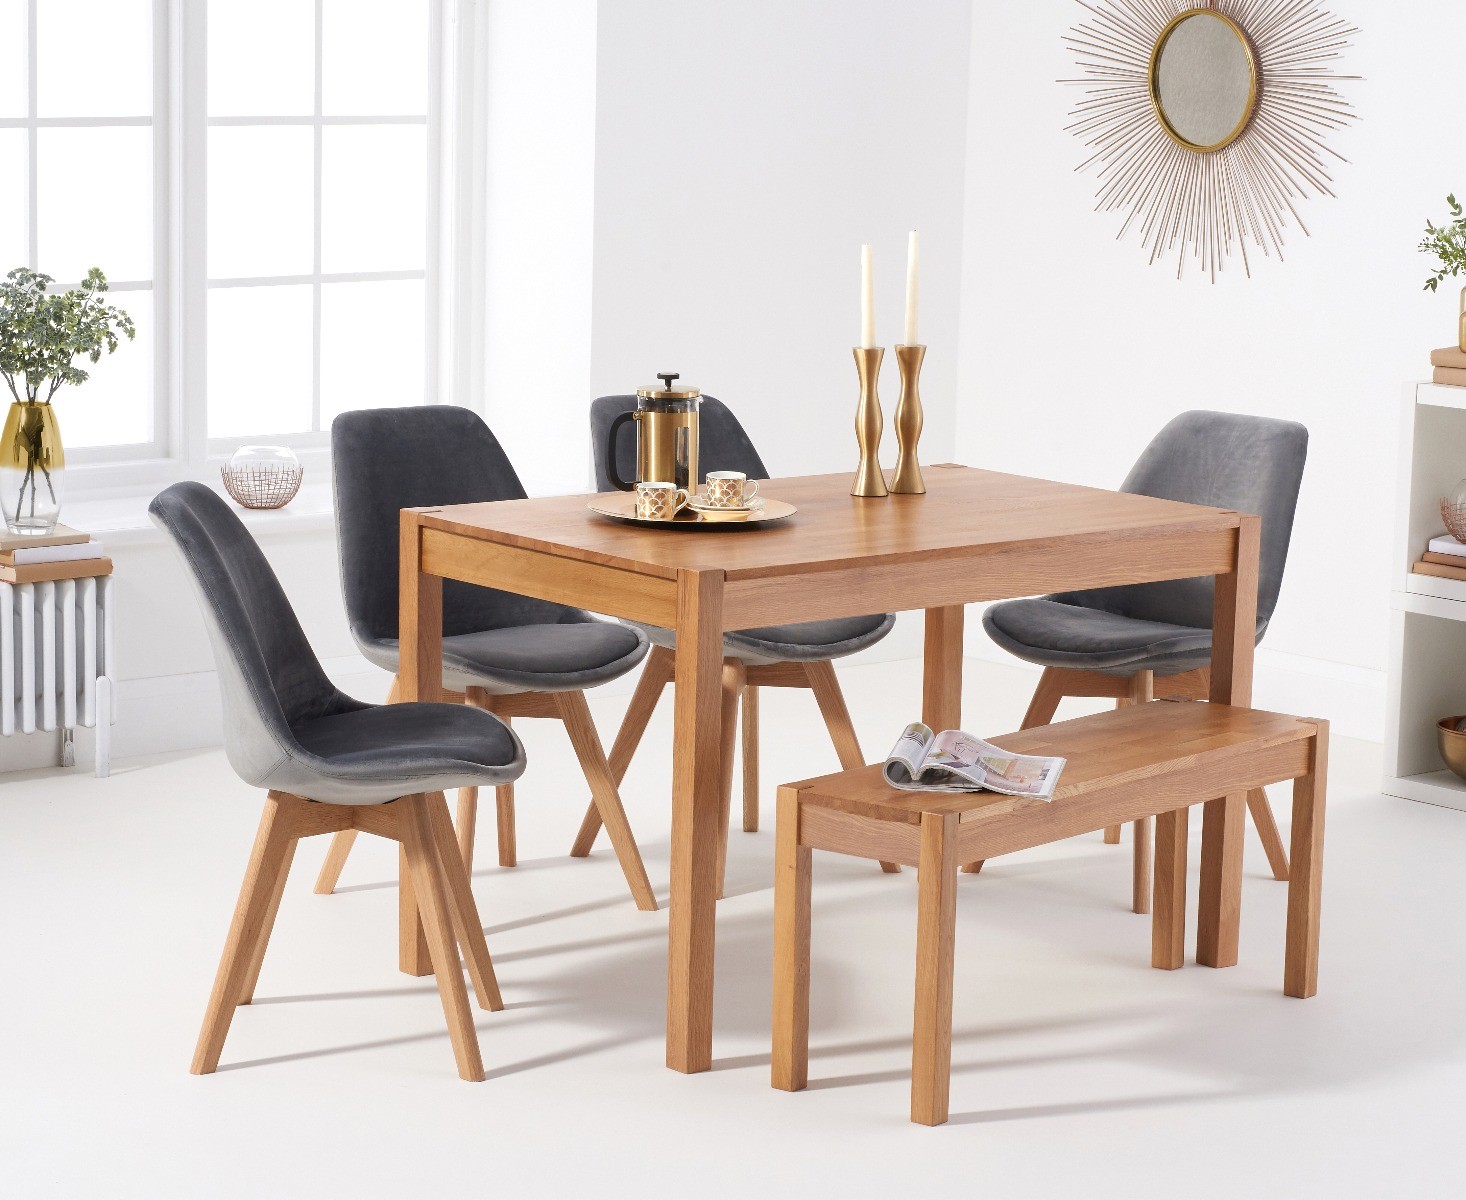 York 120cm Solid Oak Dining Table With 4 Grey Orson Velvet Chairs And 1 York Bench